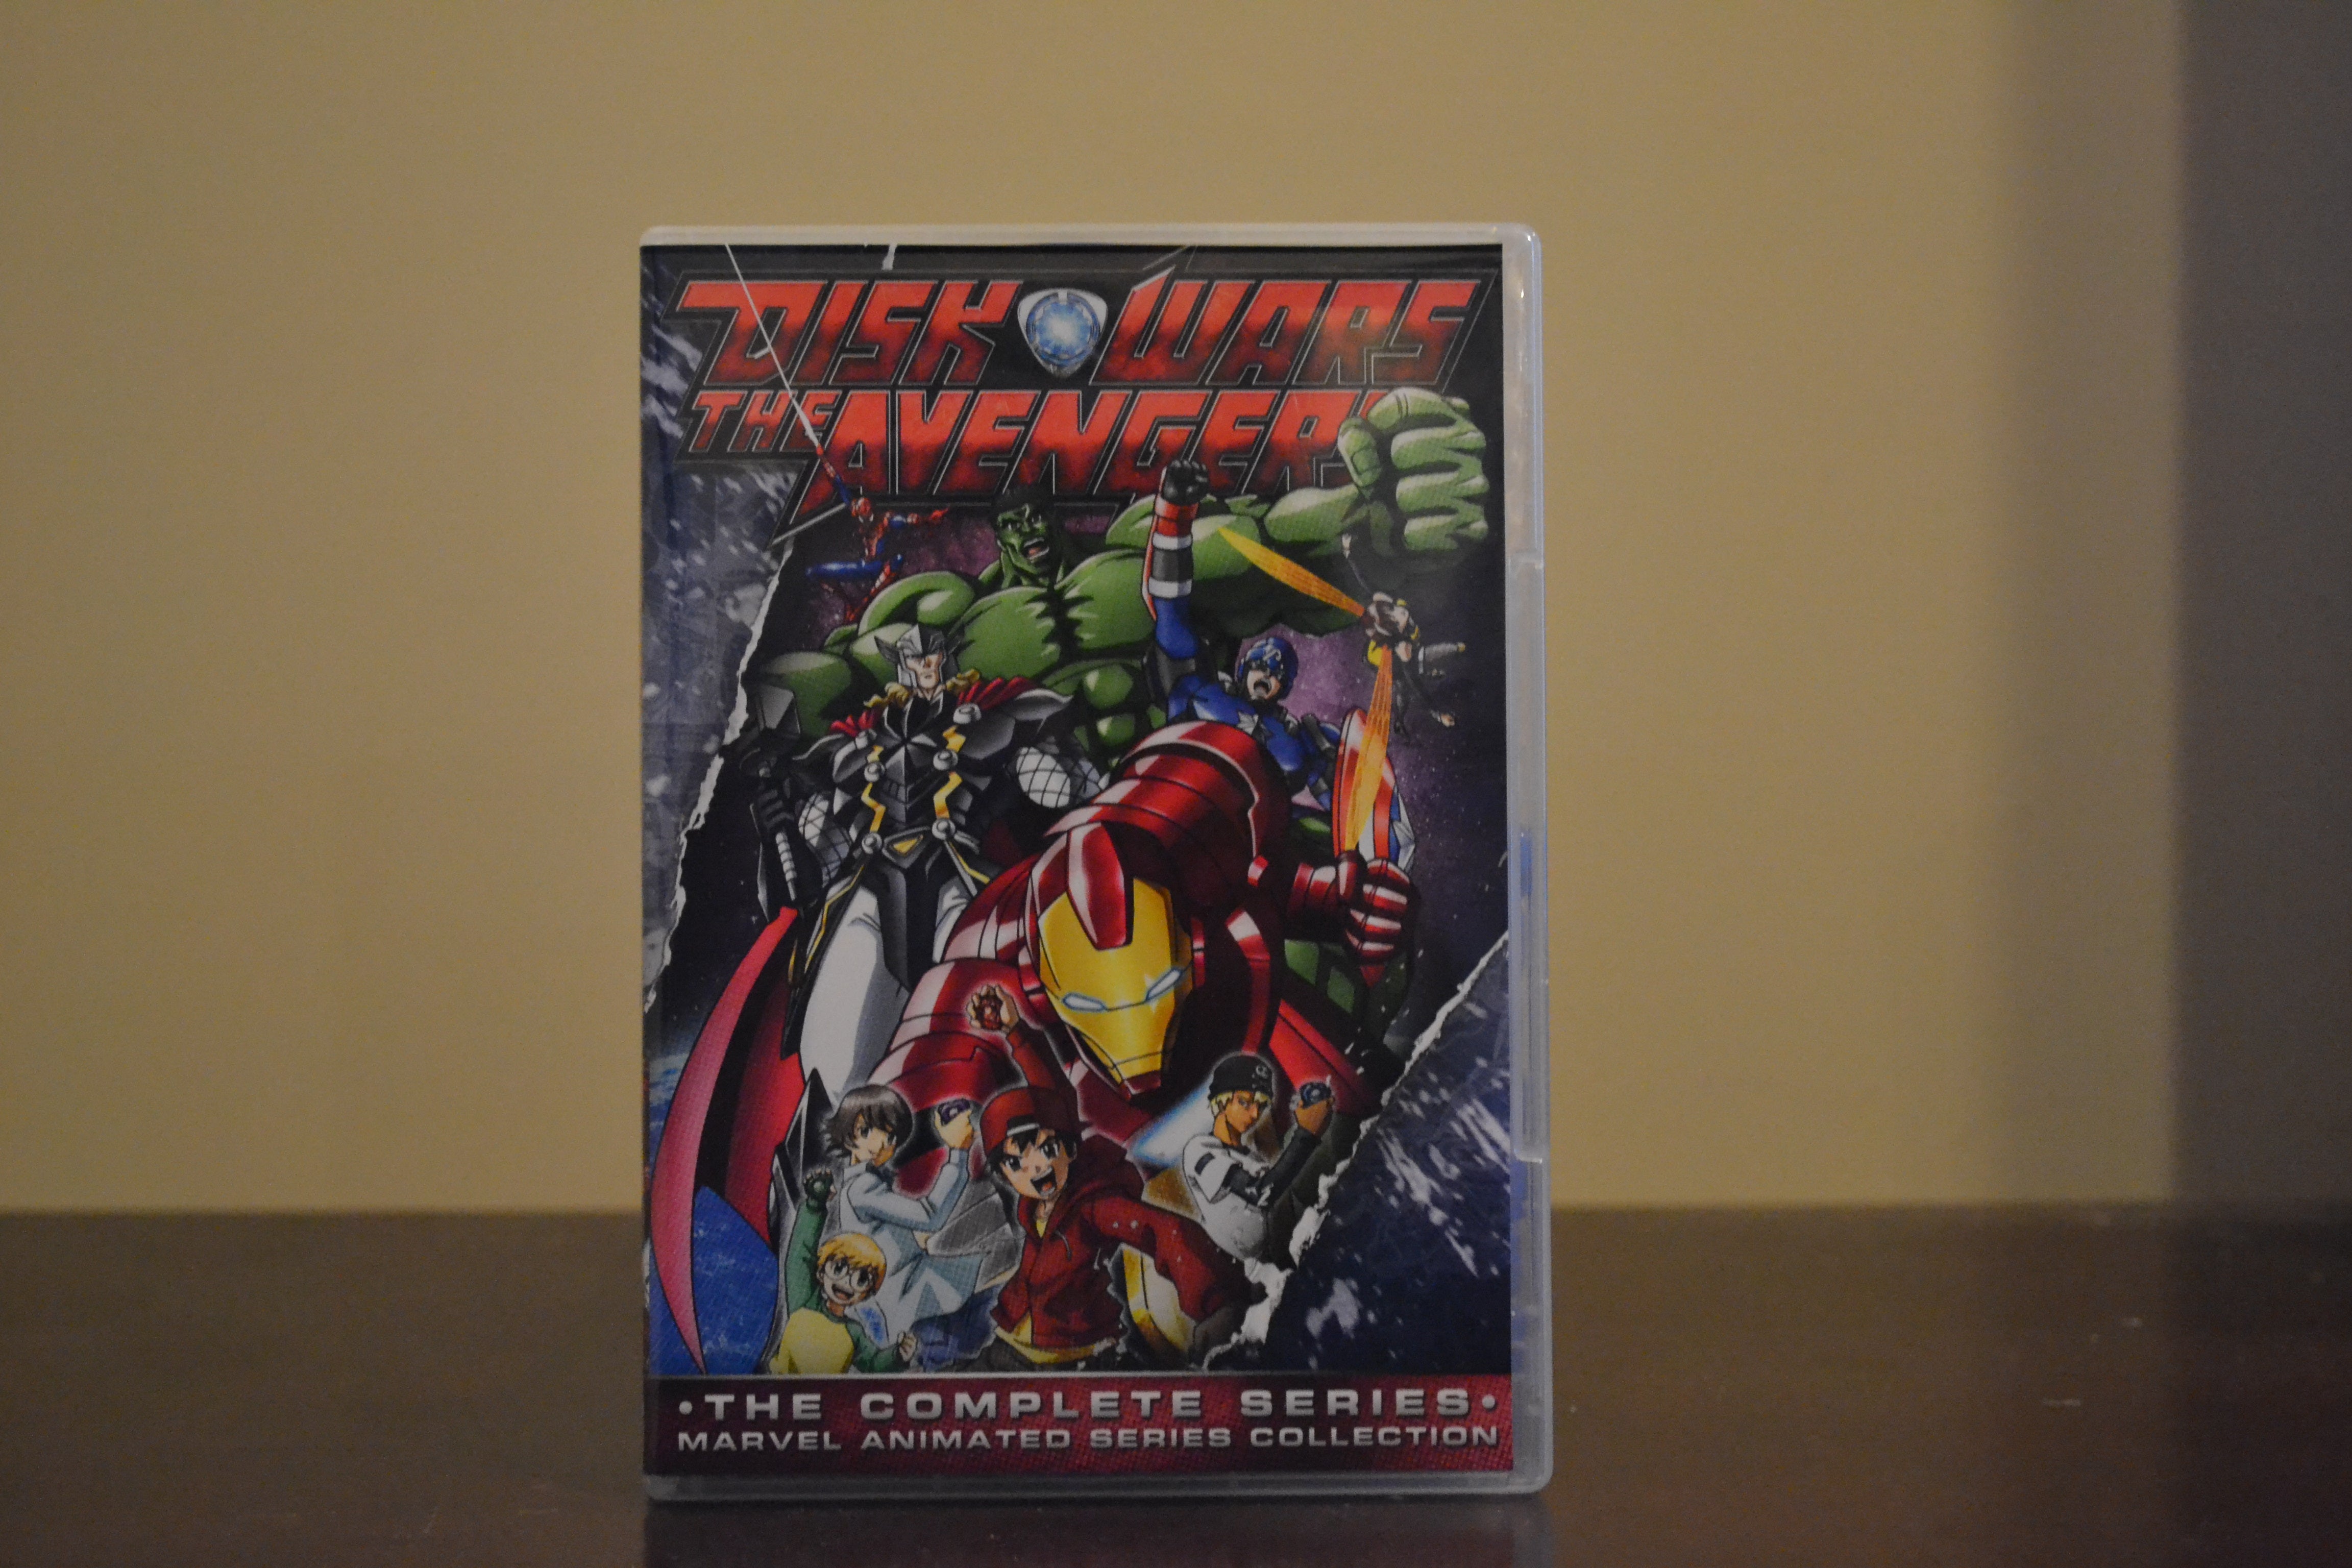 Disk Wars The Avengers The Complete Series DvD Set